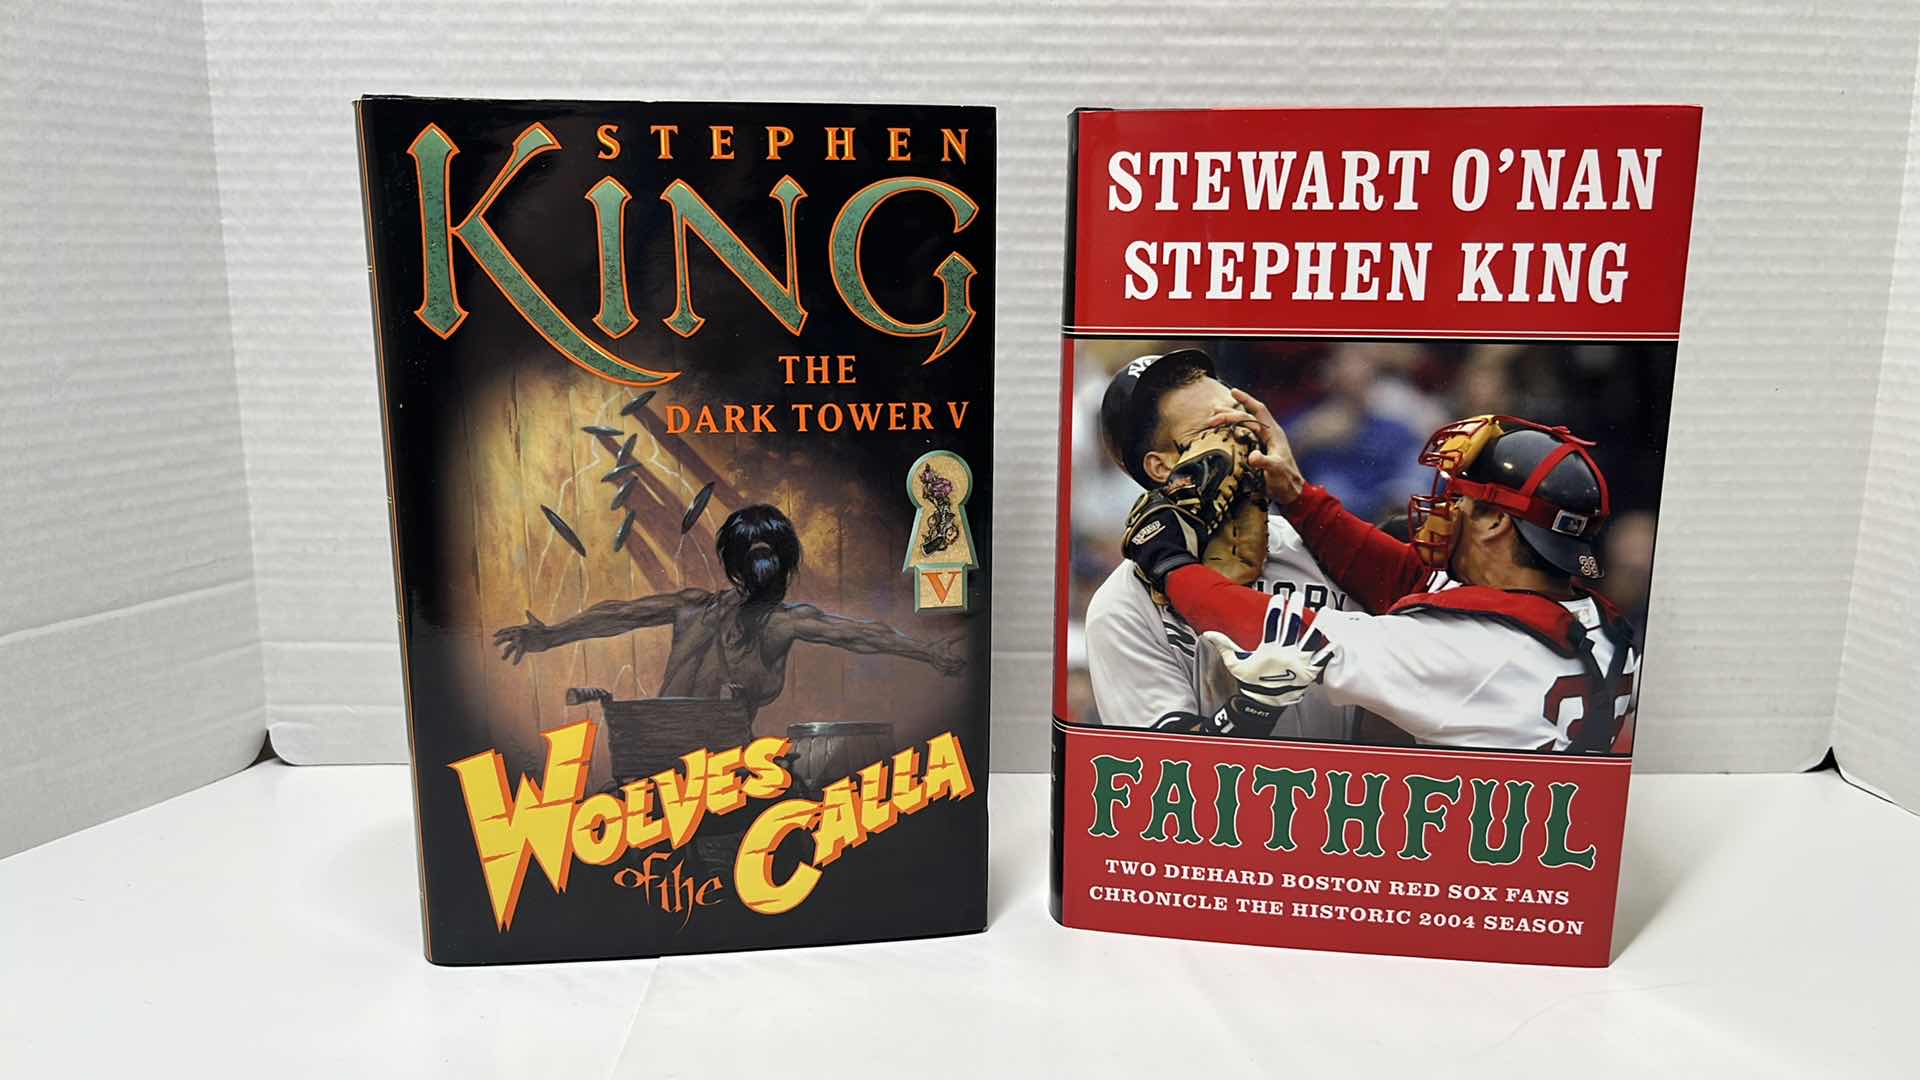 Photo 1 of WOLVES OF THE CALLA THE DARK TOWER V BY STEPHEN KING & FAITHFUL BY STEWART O’NAN & STEPHEN KING, HARDCOVER BOOKS (2)